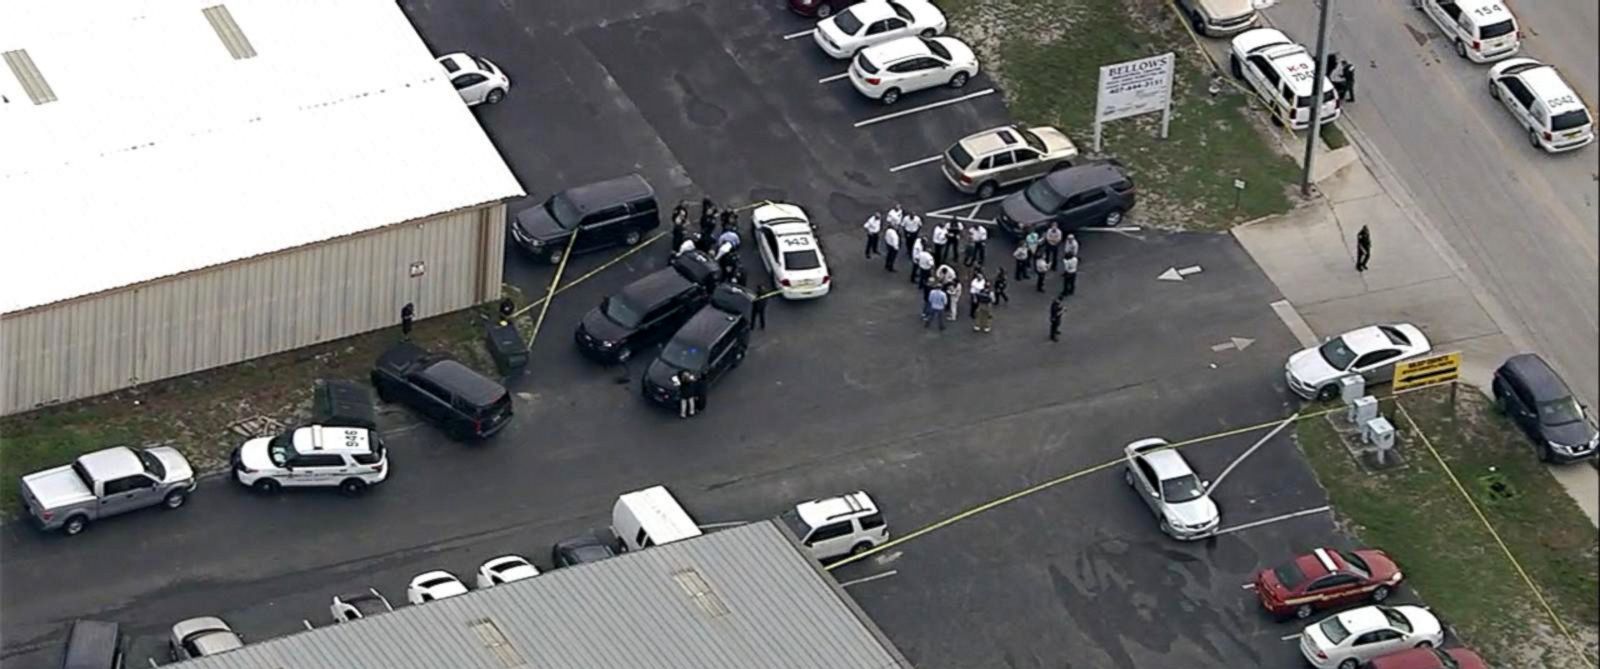 Gunman opens fire at business headquarters in Florida; many injured